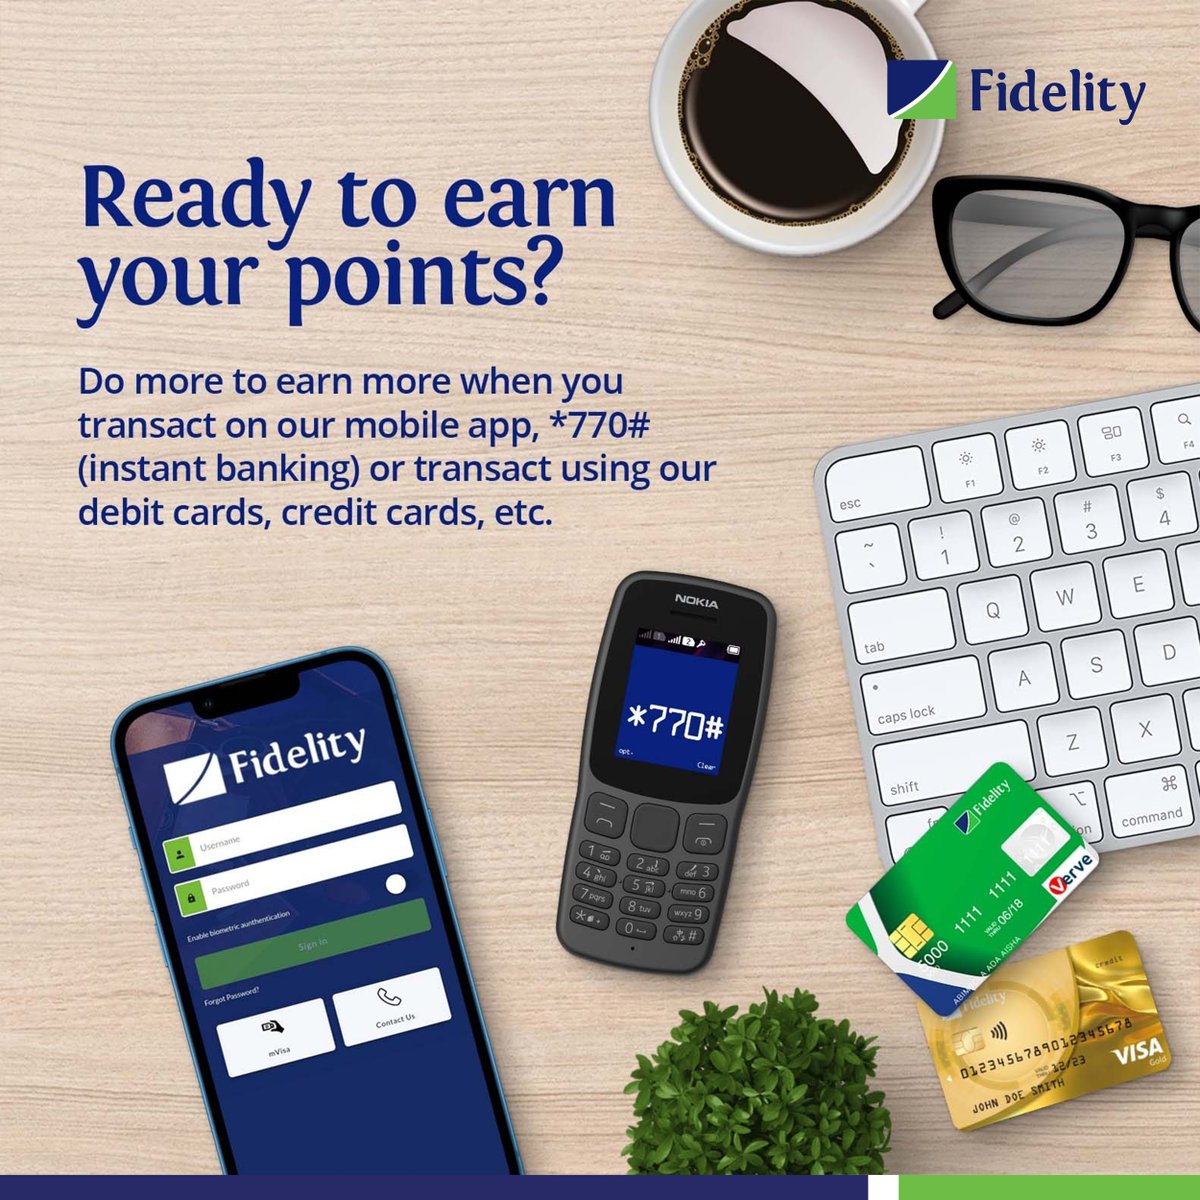 Hey Fidelity Fam, Redeem your Green rewards points today!🥳 You can earn more points when you transact through our channels such as the Fidelity Mobile App, POS, ATMs, and *770# (Instant Banking). Start enjoying the benefits of your loyalty today! Terms and conditions apply.